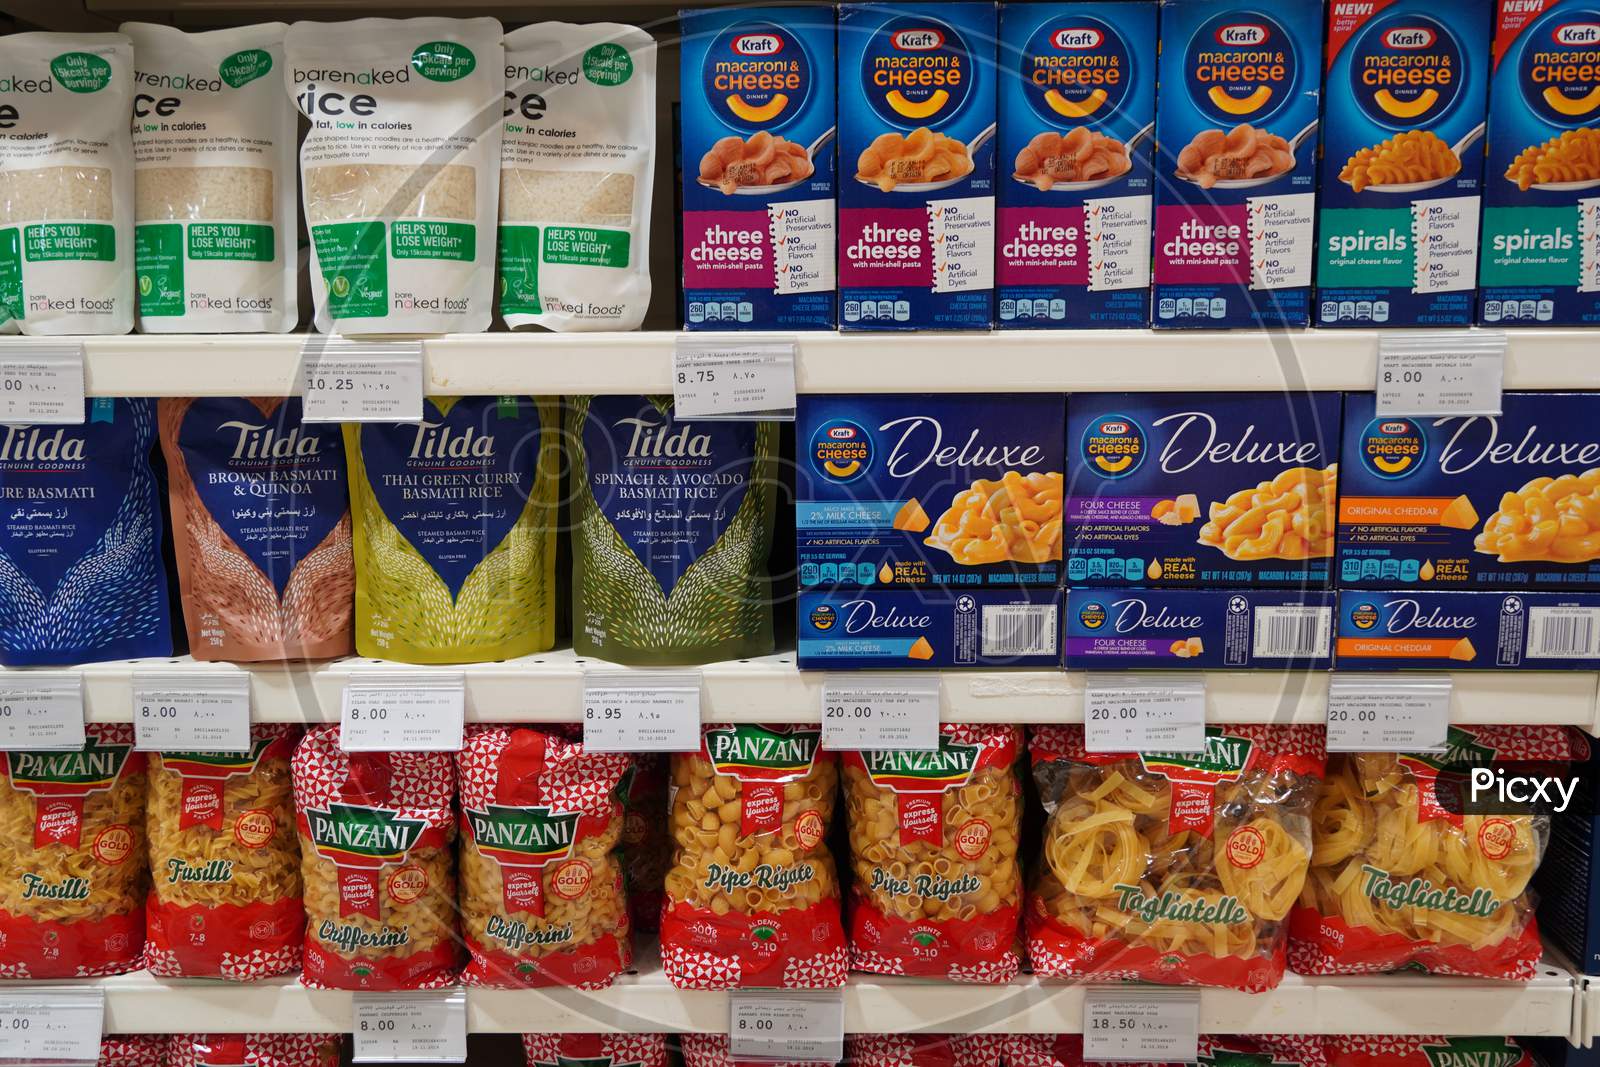 Dubai Uae December 2019 - Selection Of Italian Pasta On The Shelves In A Supermarket. Pasta Aisle With Shelves In A Supermarket. 